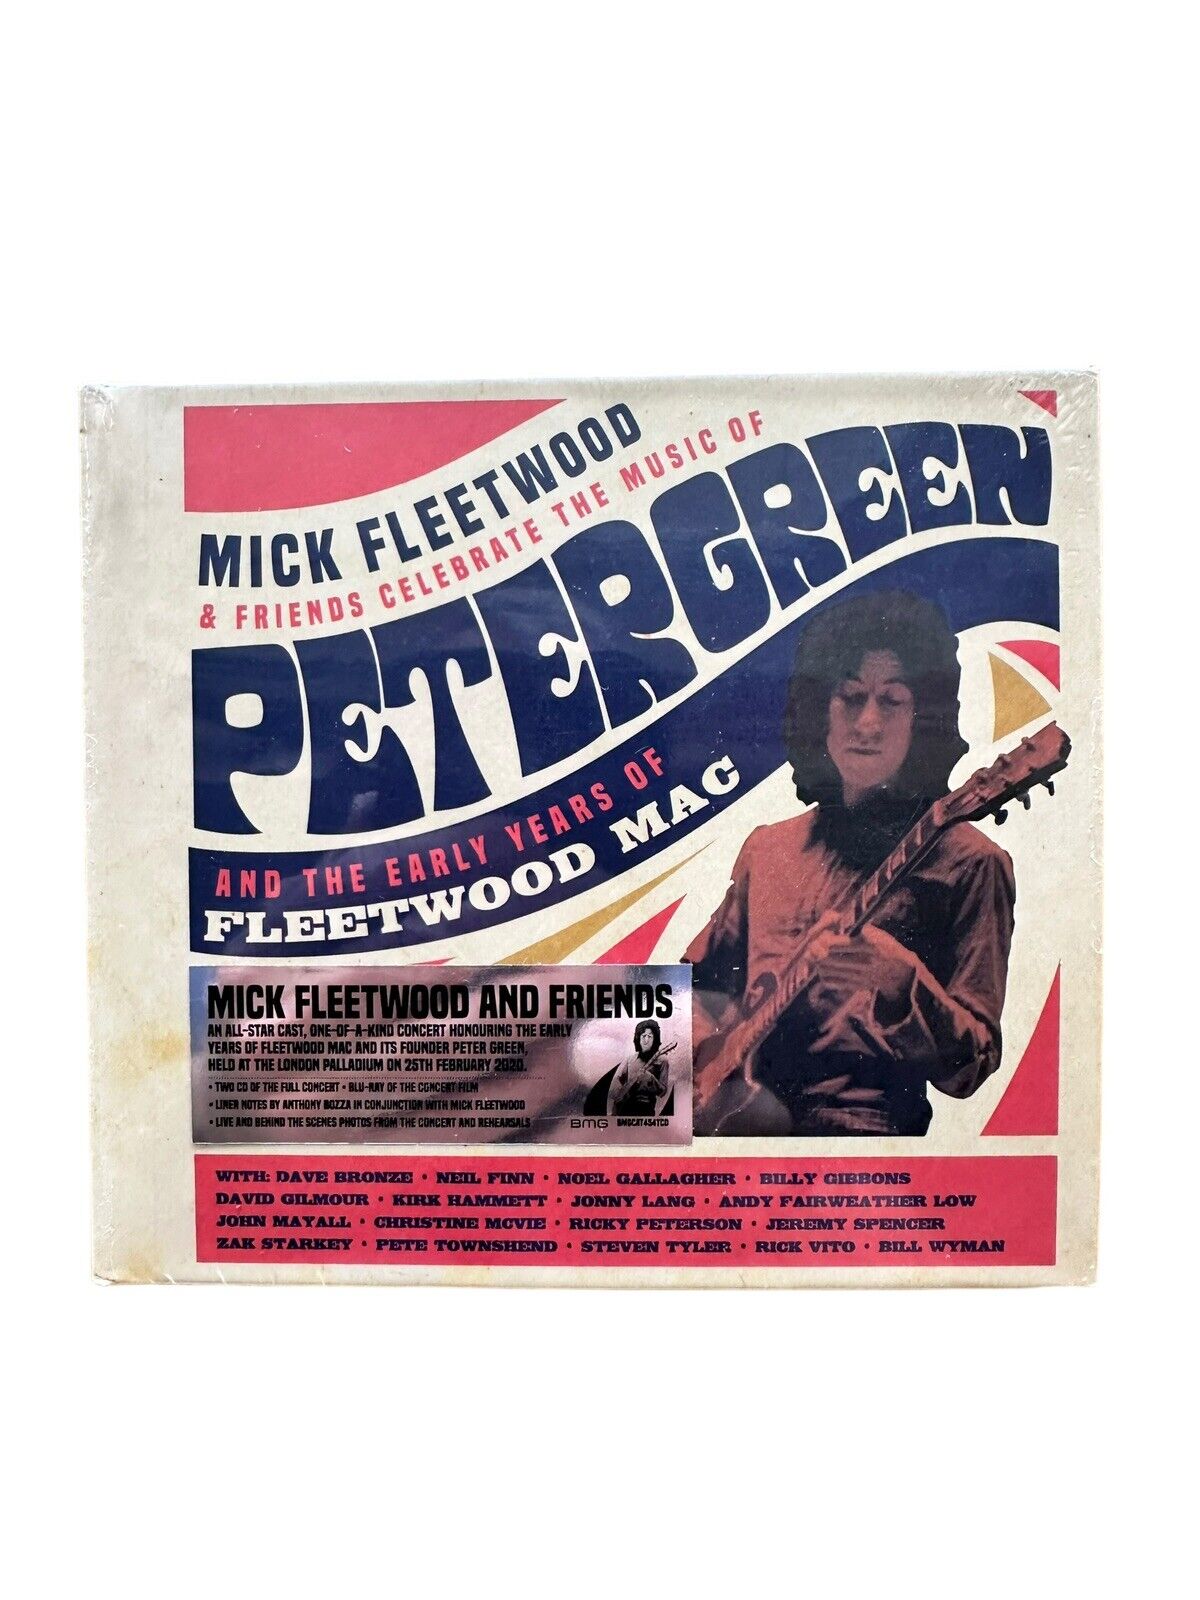 Mick Fleetwood Celebrate The Music Of Peter Green & The Early Years of Fleet New